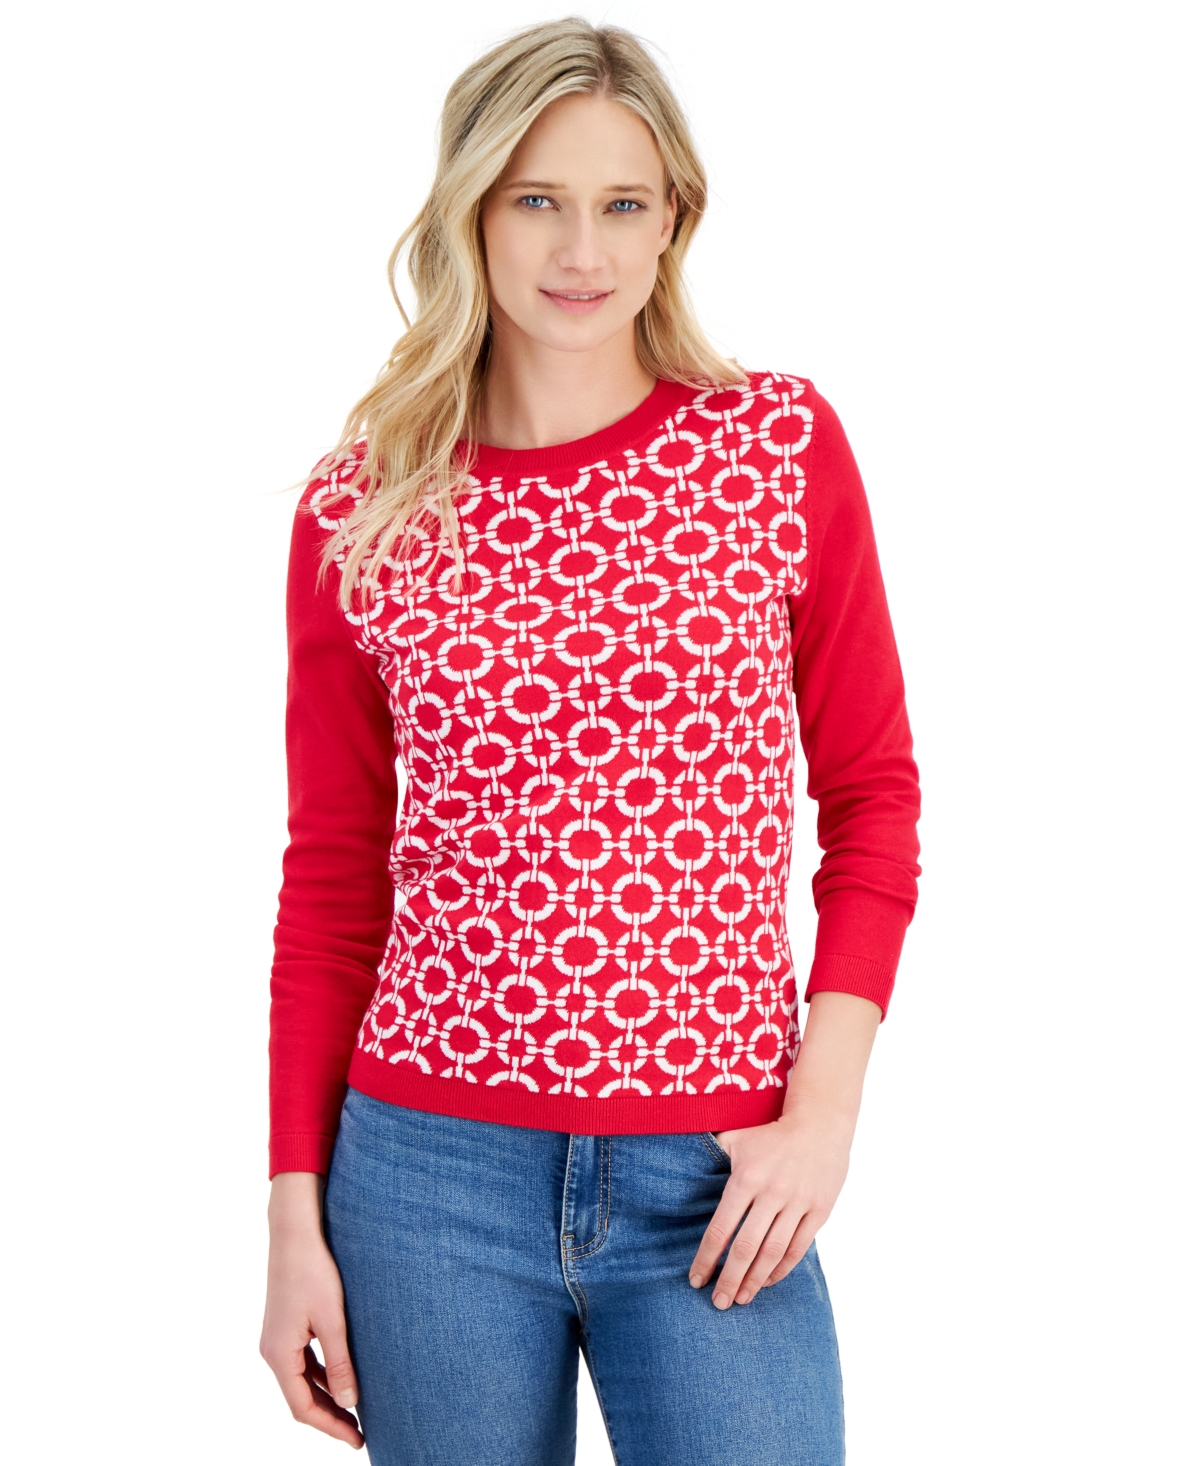 Women's Cotton Circle Link Crewneck Sweater - Bright Red